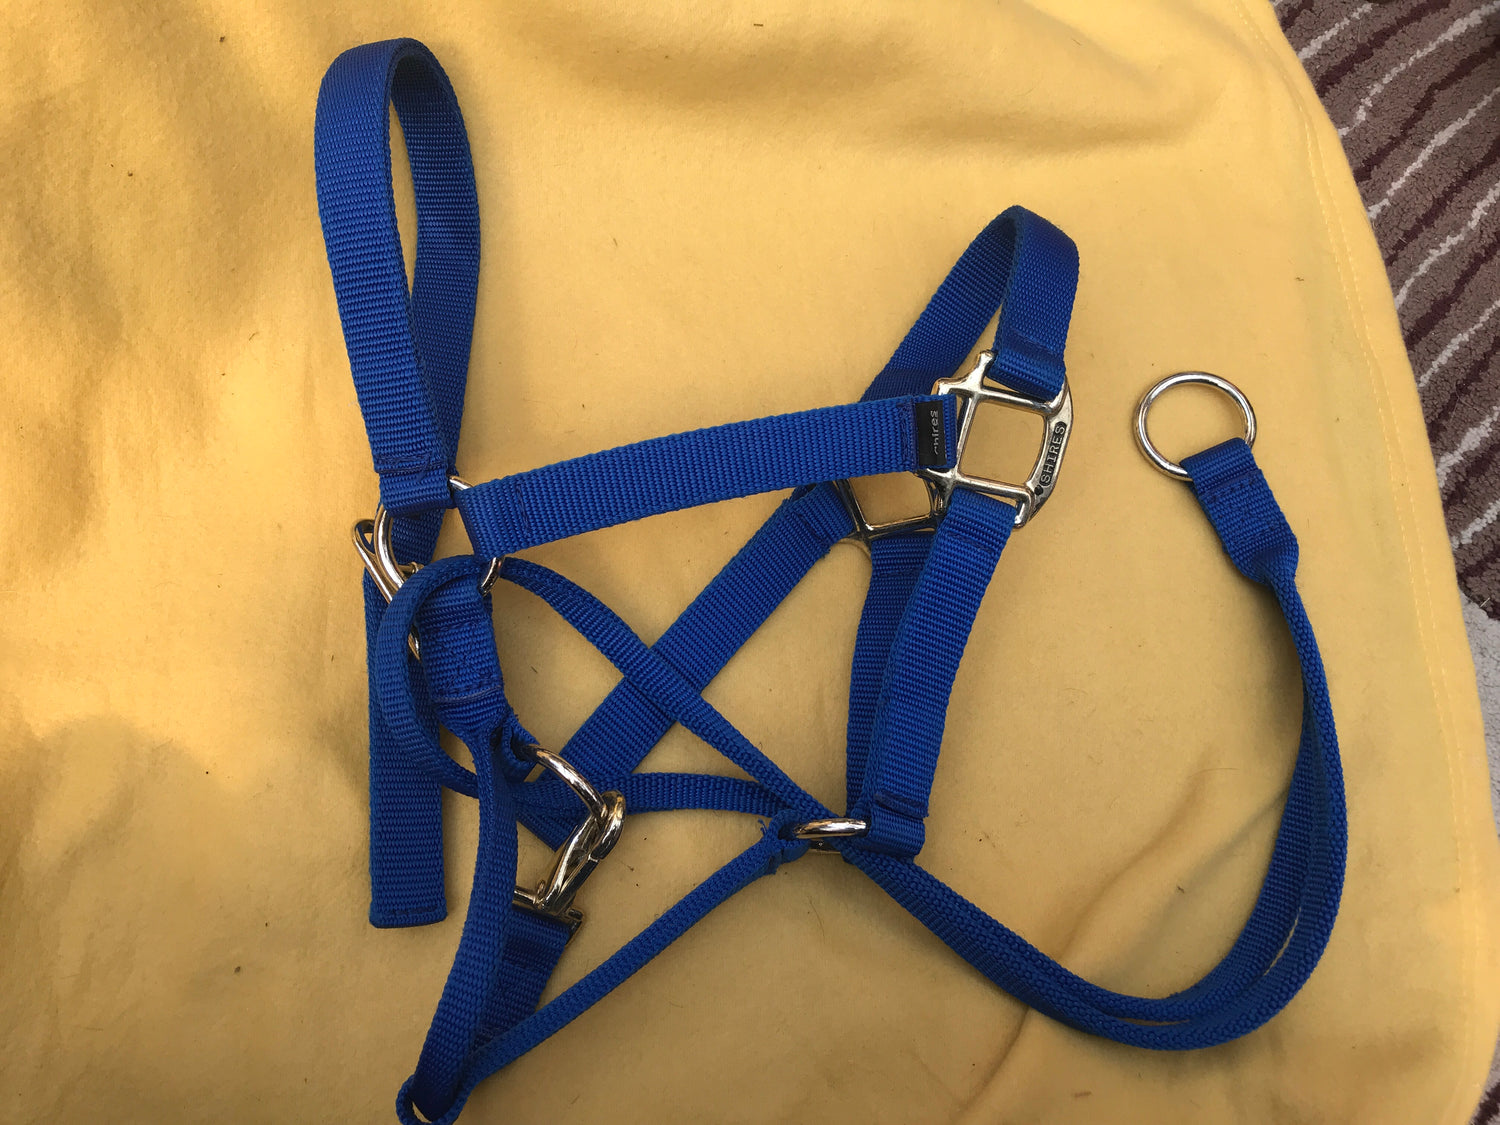 Control head collars and pressure halters